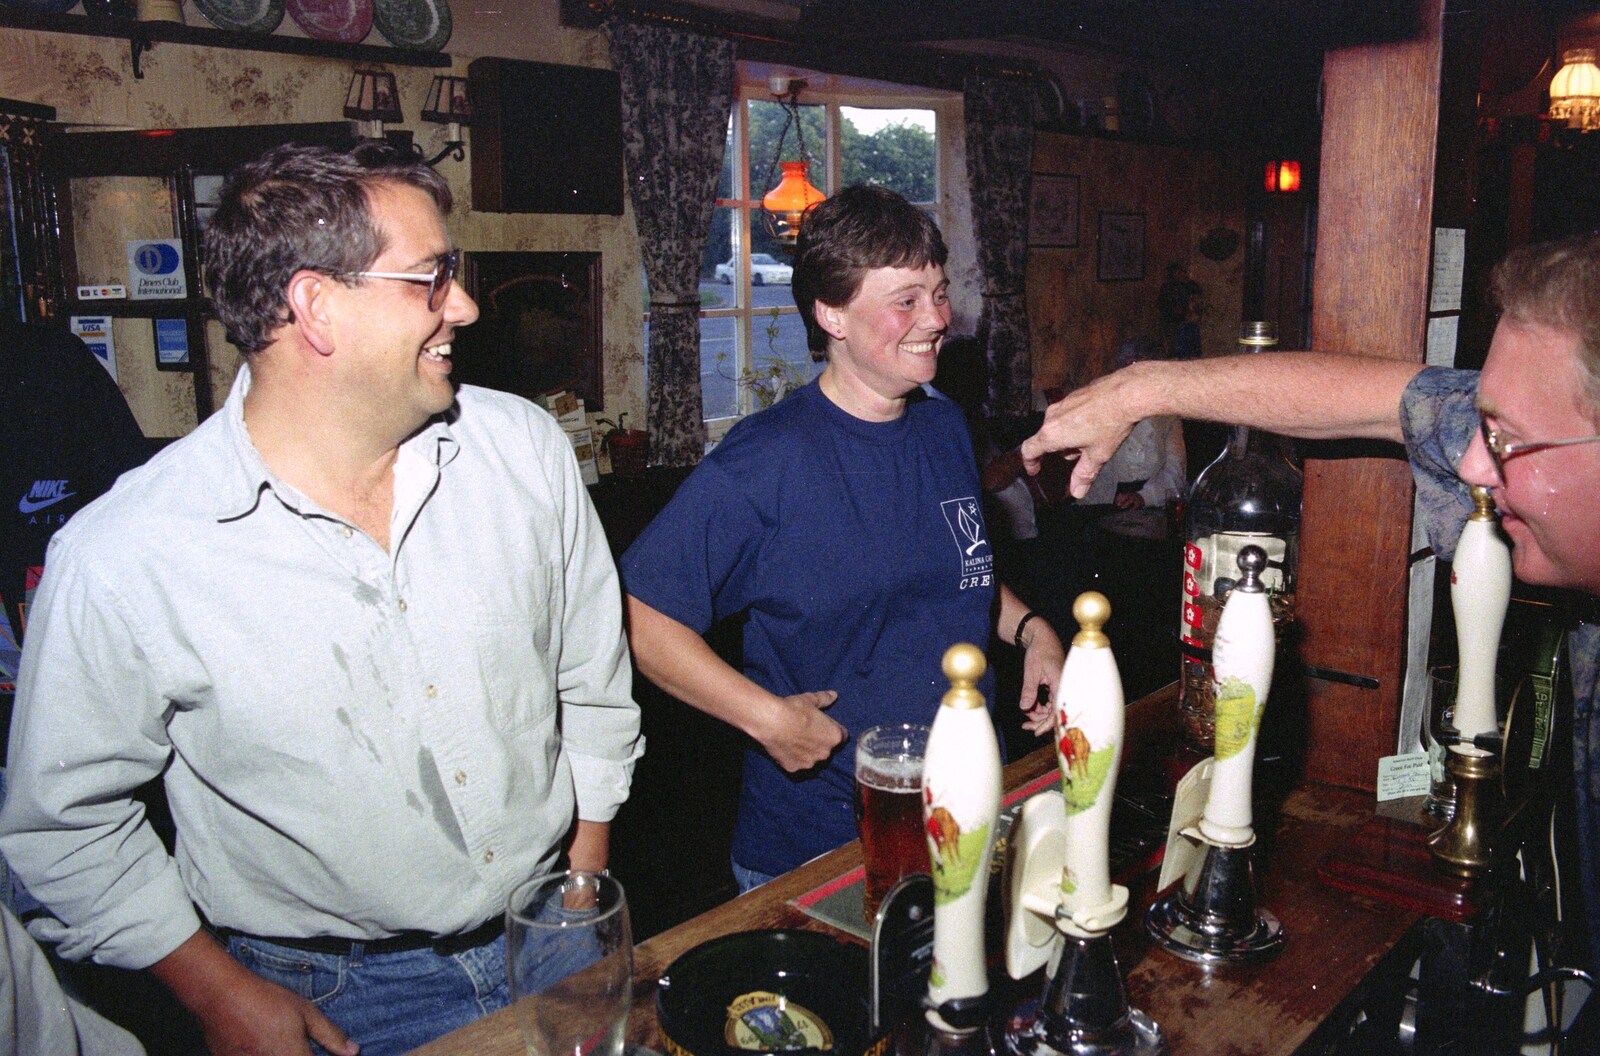 John Willy reaches over to shake the winner's hand from A Welly Boot of Beer at the Swan Inn, Brome, Suffolk - 15th June 1996